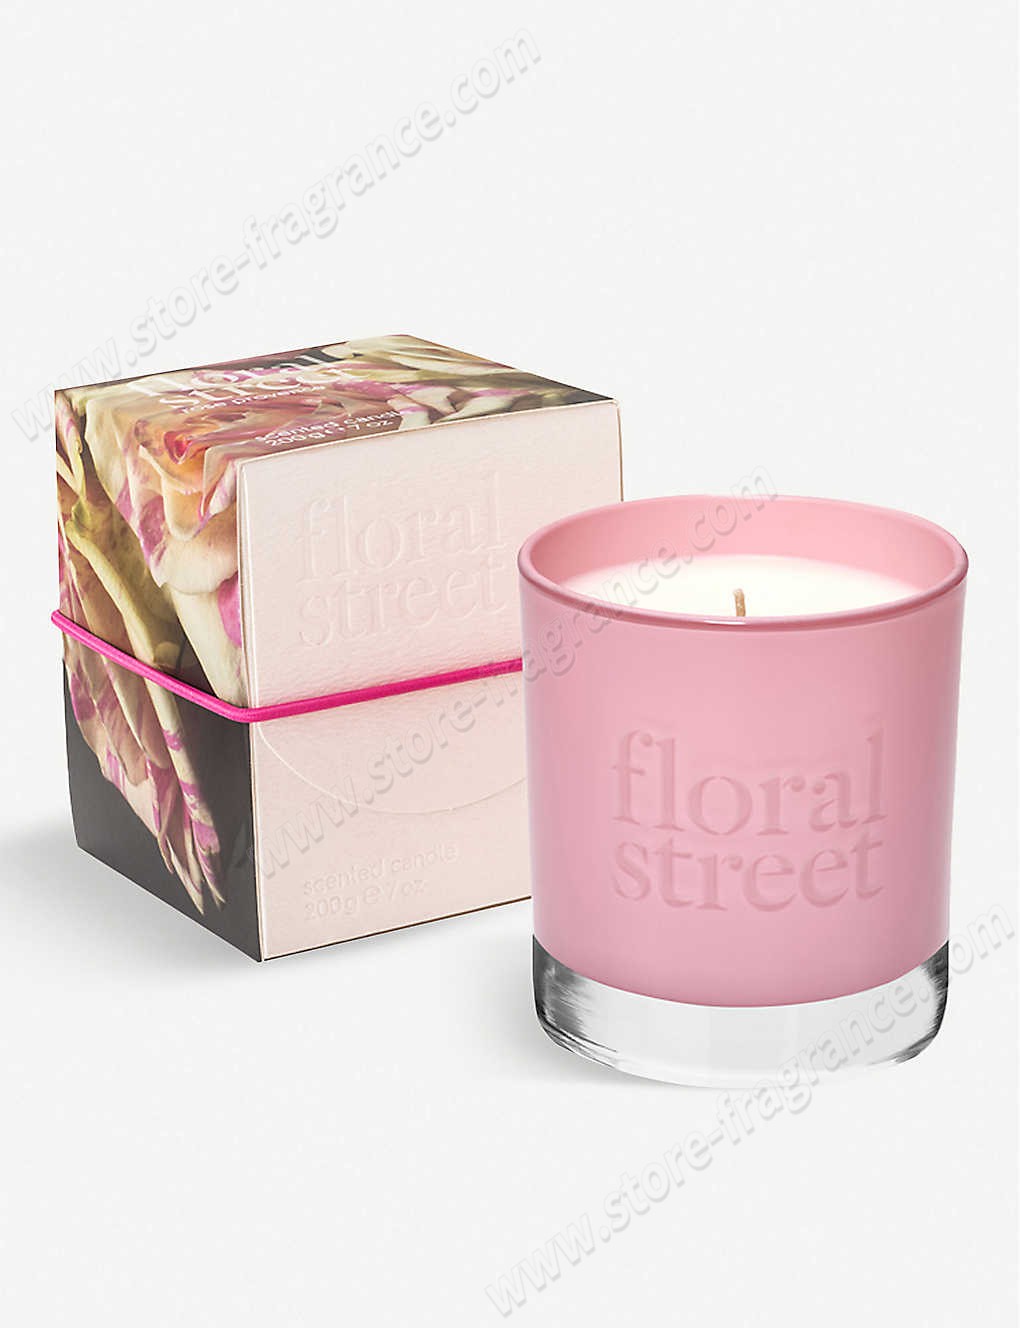 FLORAL STREET/Rose Provence scented candle 200g ✿ Discount Store - -1